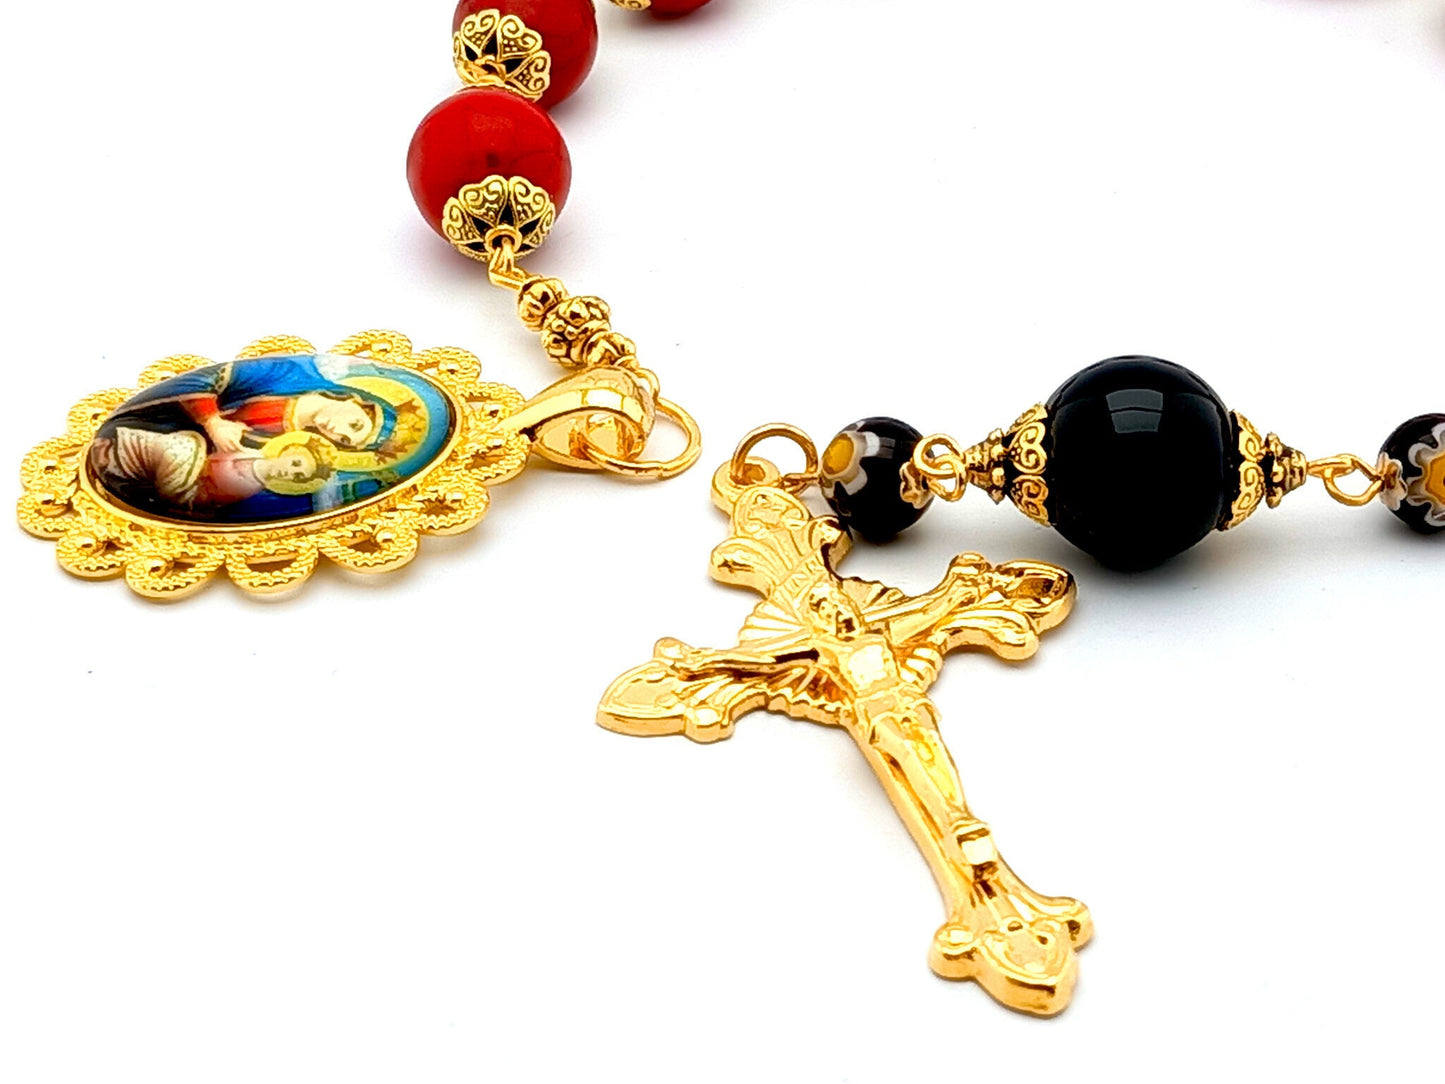 Our Lady of Perpetual Help unique rosary beads single decade rosary with red gemstone and onyx beads, golden sunburst crucifix and picture end medal.